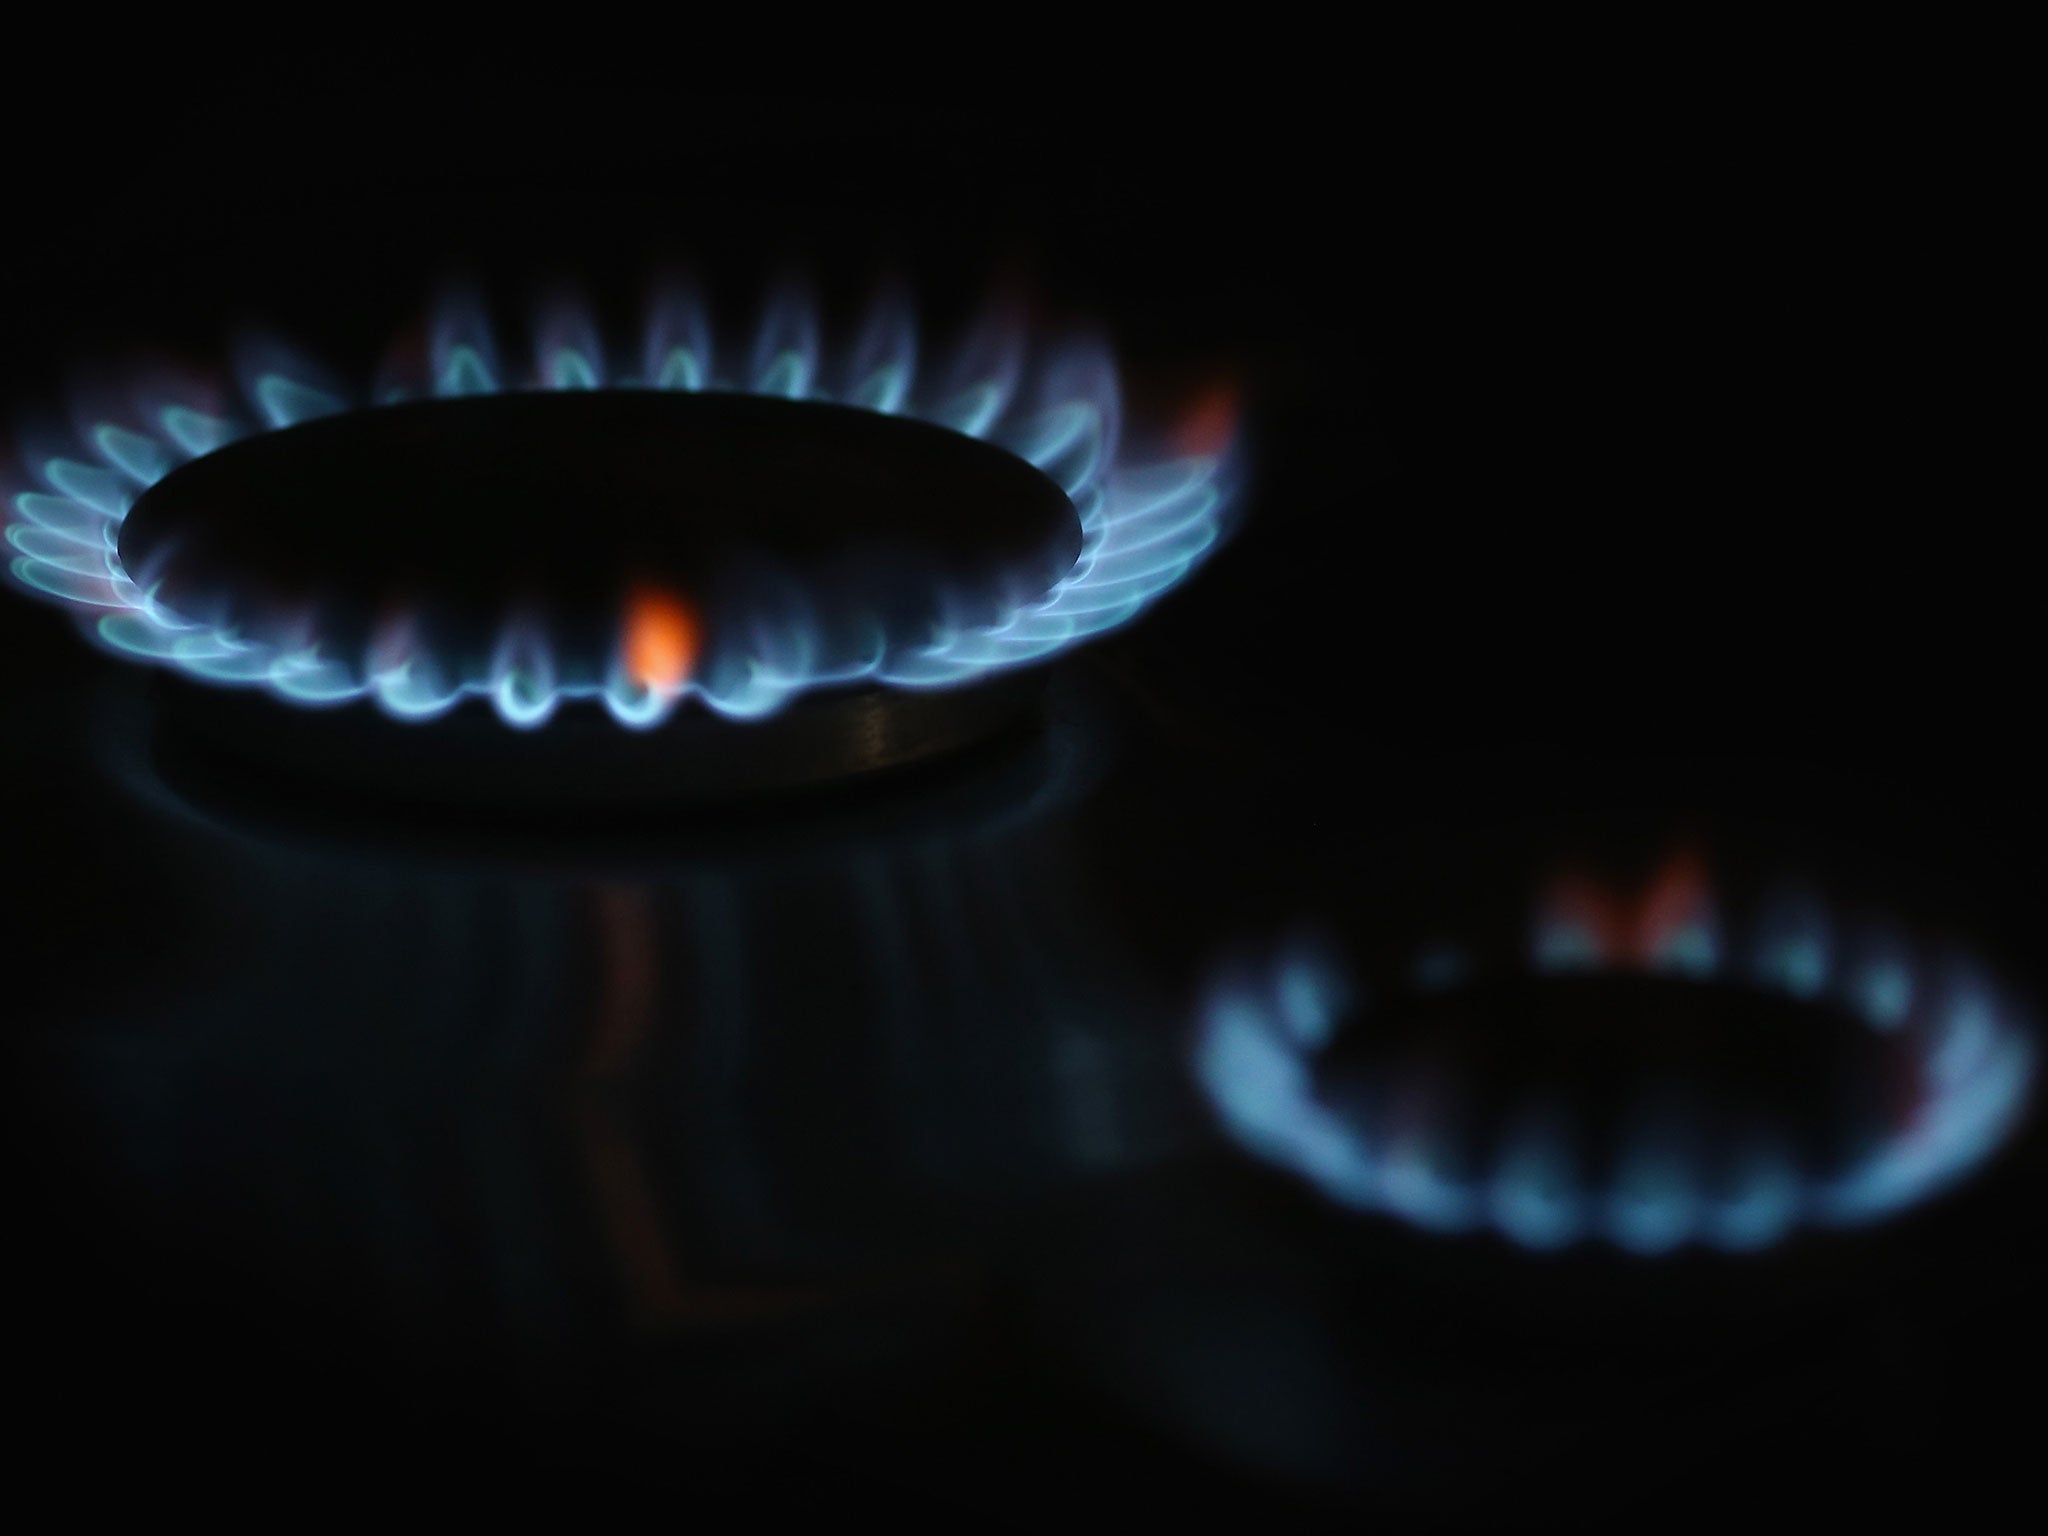 National Grid says £500 million extra costs could flow to consumers